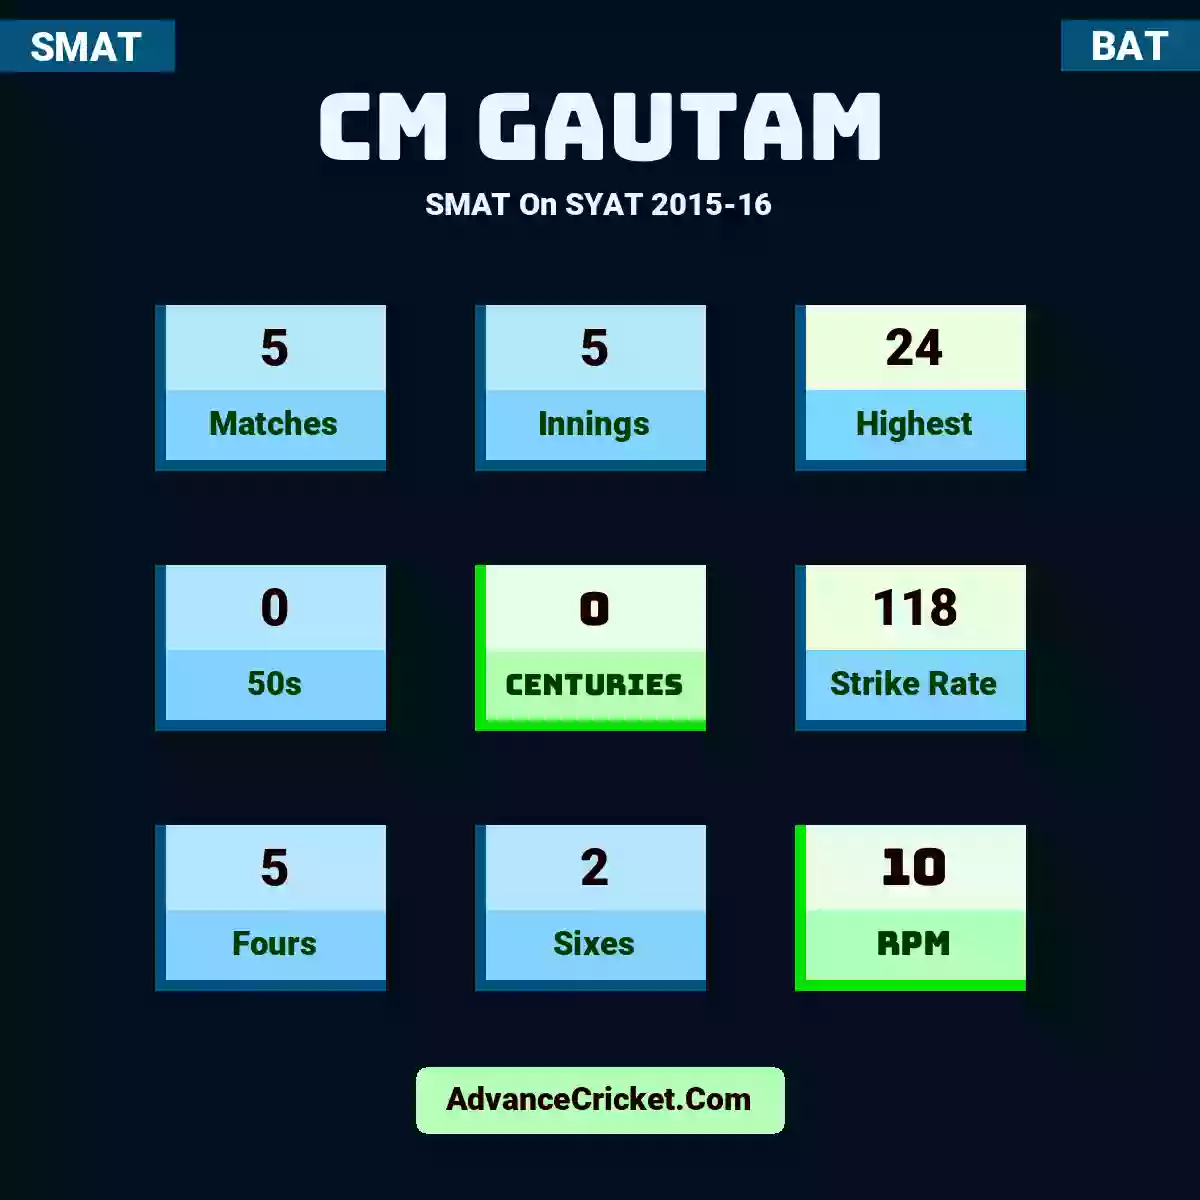 CM Gautam SMAT  On SYAT 2015-16, CM Gautam played 5 matches, scored 24 runs as highest, 0 half-centuries, and 0 centuries, with a strike rate of 118. C.Gautam hit 5 fours and 2 sixes, with an RPM of 10.